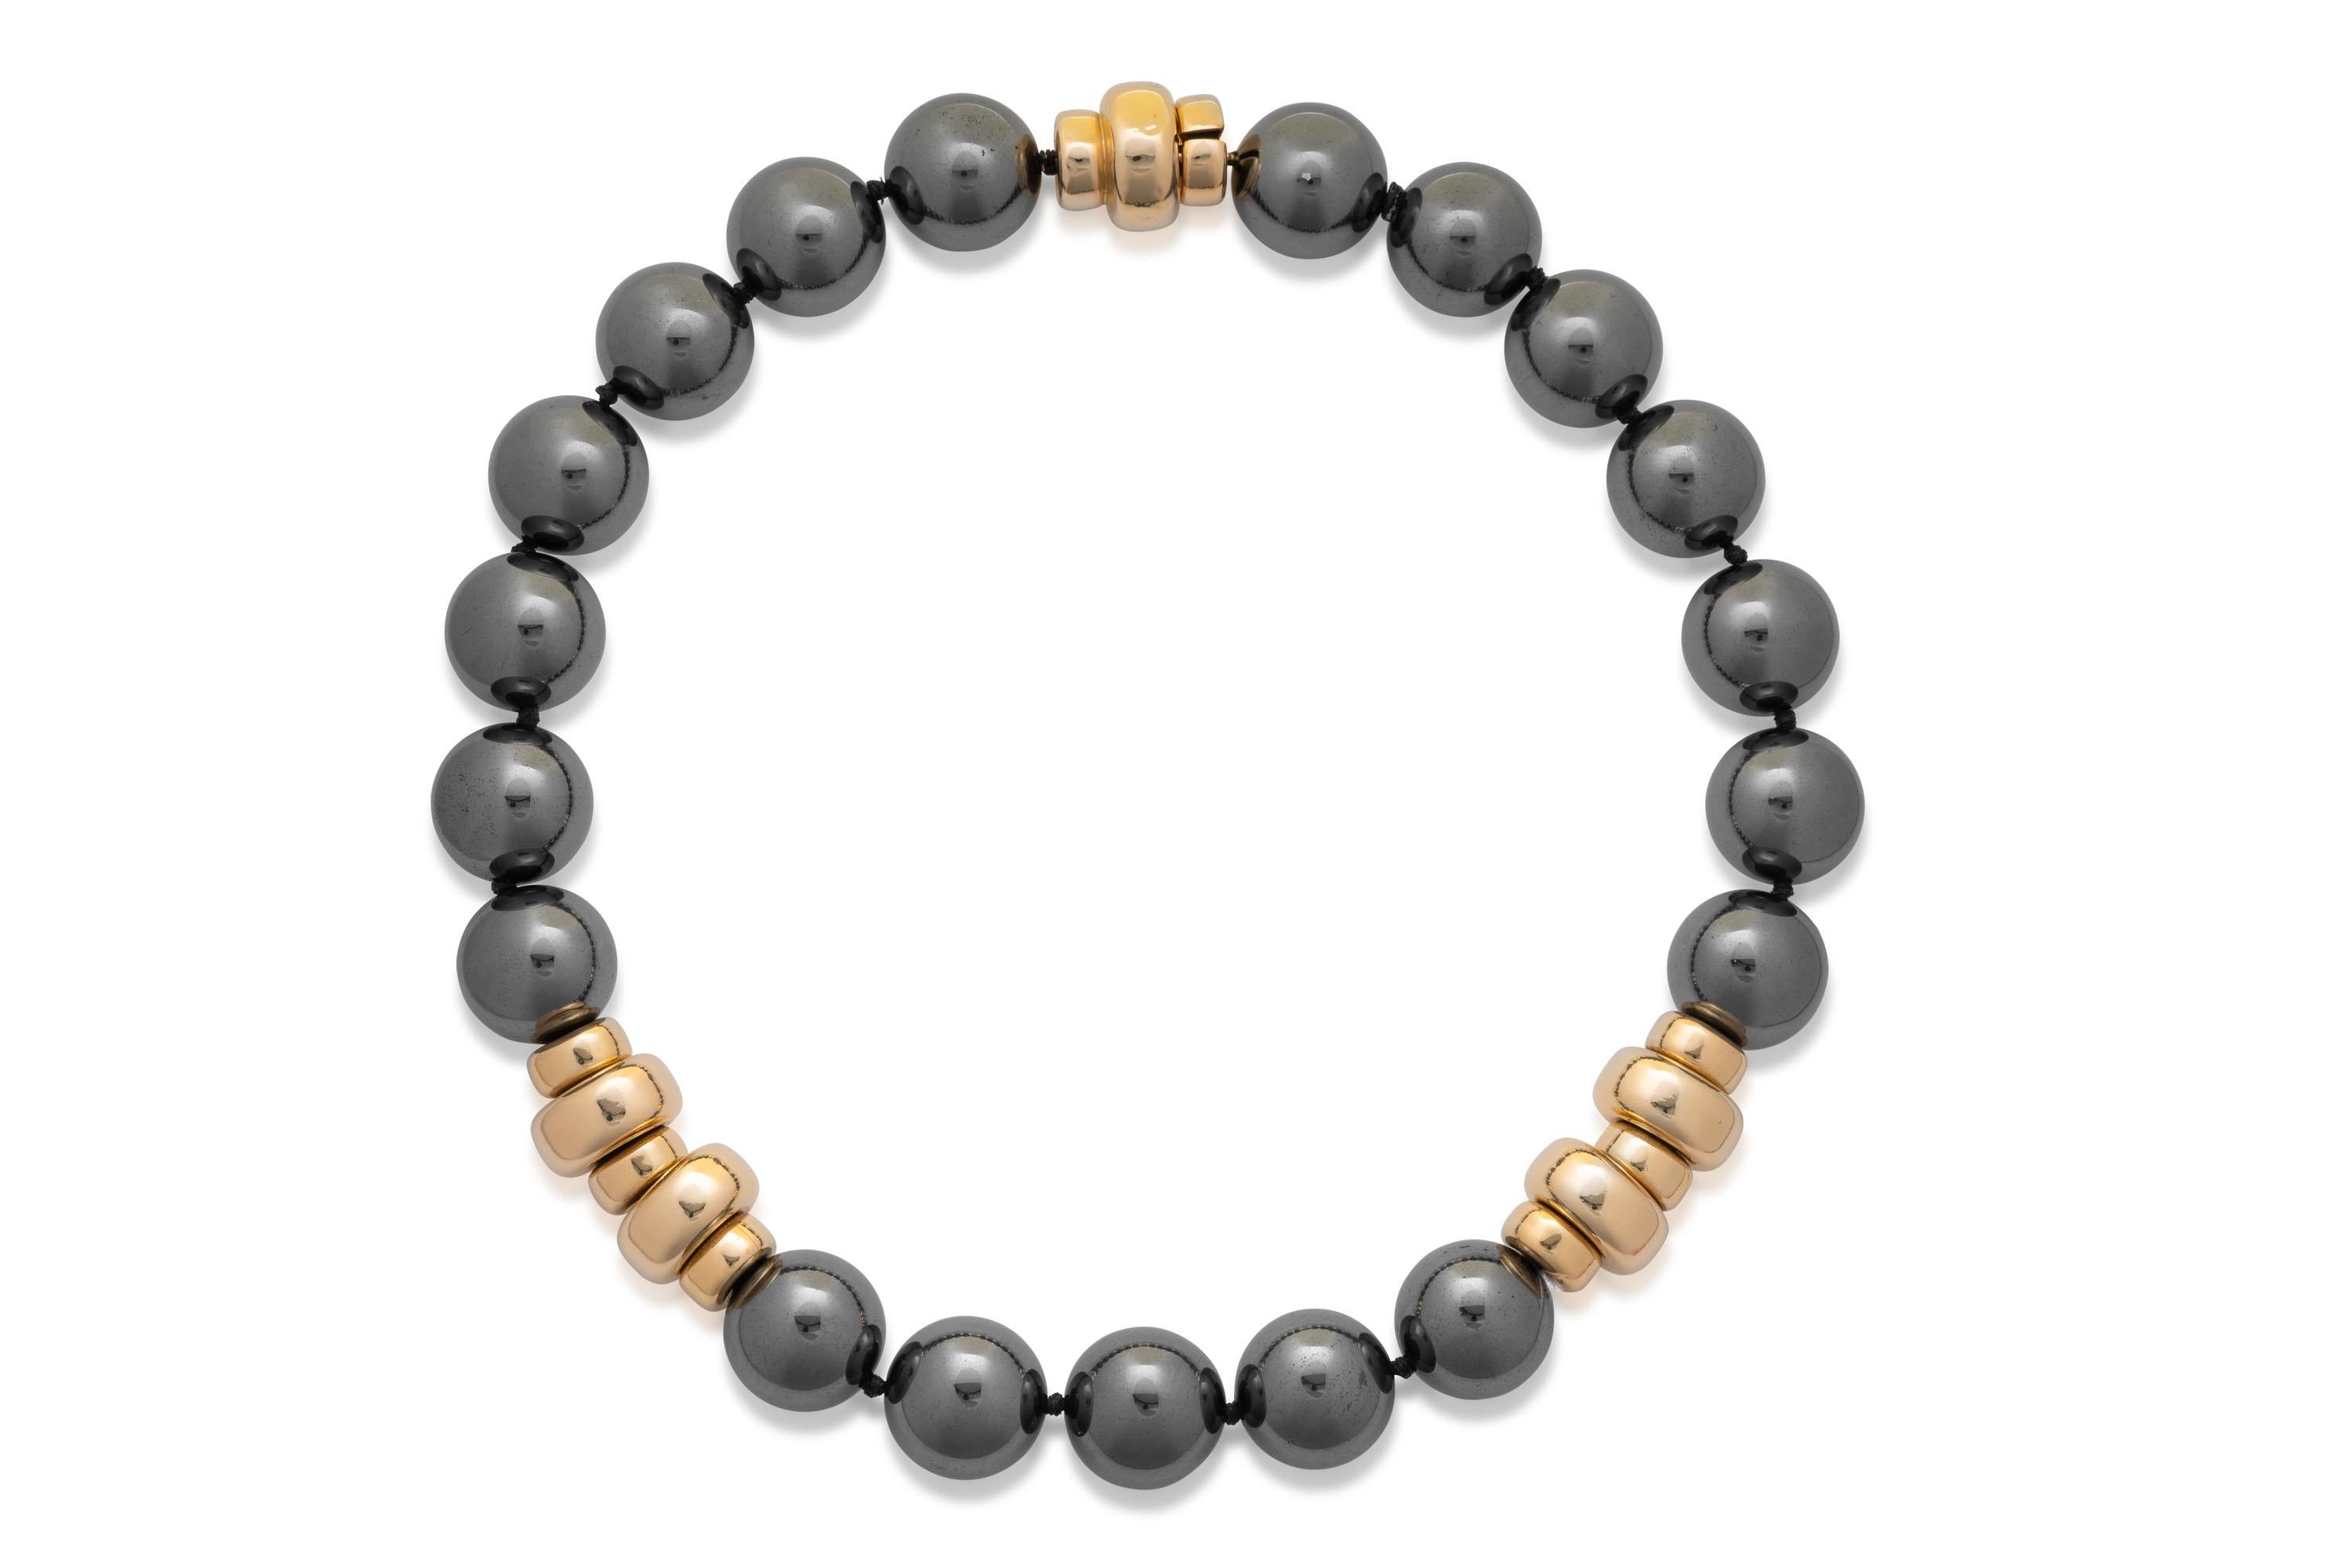 Exceptionally fine and rare Harry Winston hematite necklace with a gold clasp. It features hematite beads of 20mm in diameter. This necklace is further accented by a beautiful gold clasp figure. 
HEMATITE AND GOLD EARRINGS, HARRY WINSTON; cabochons